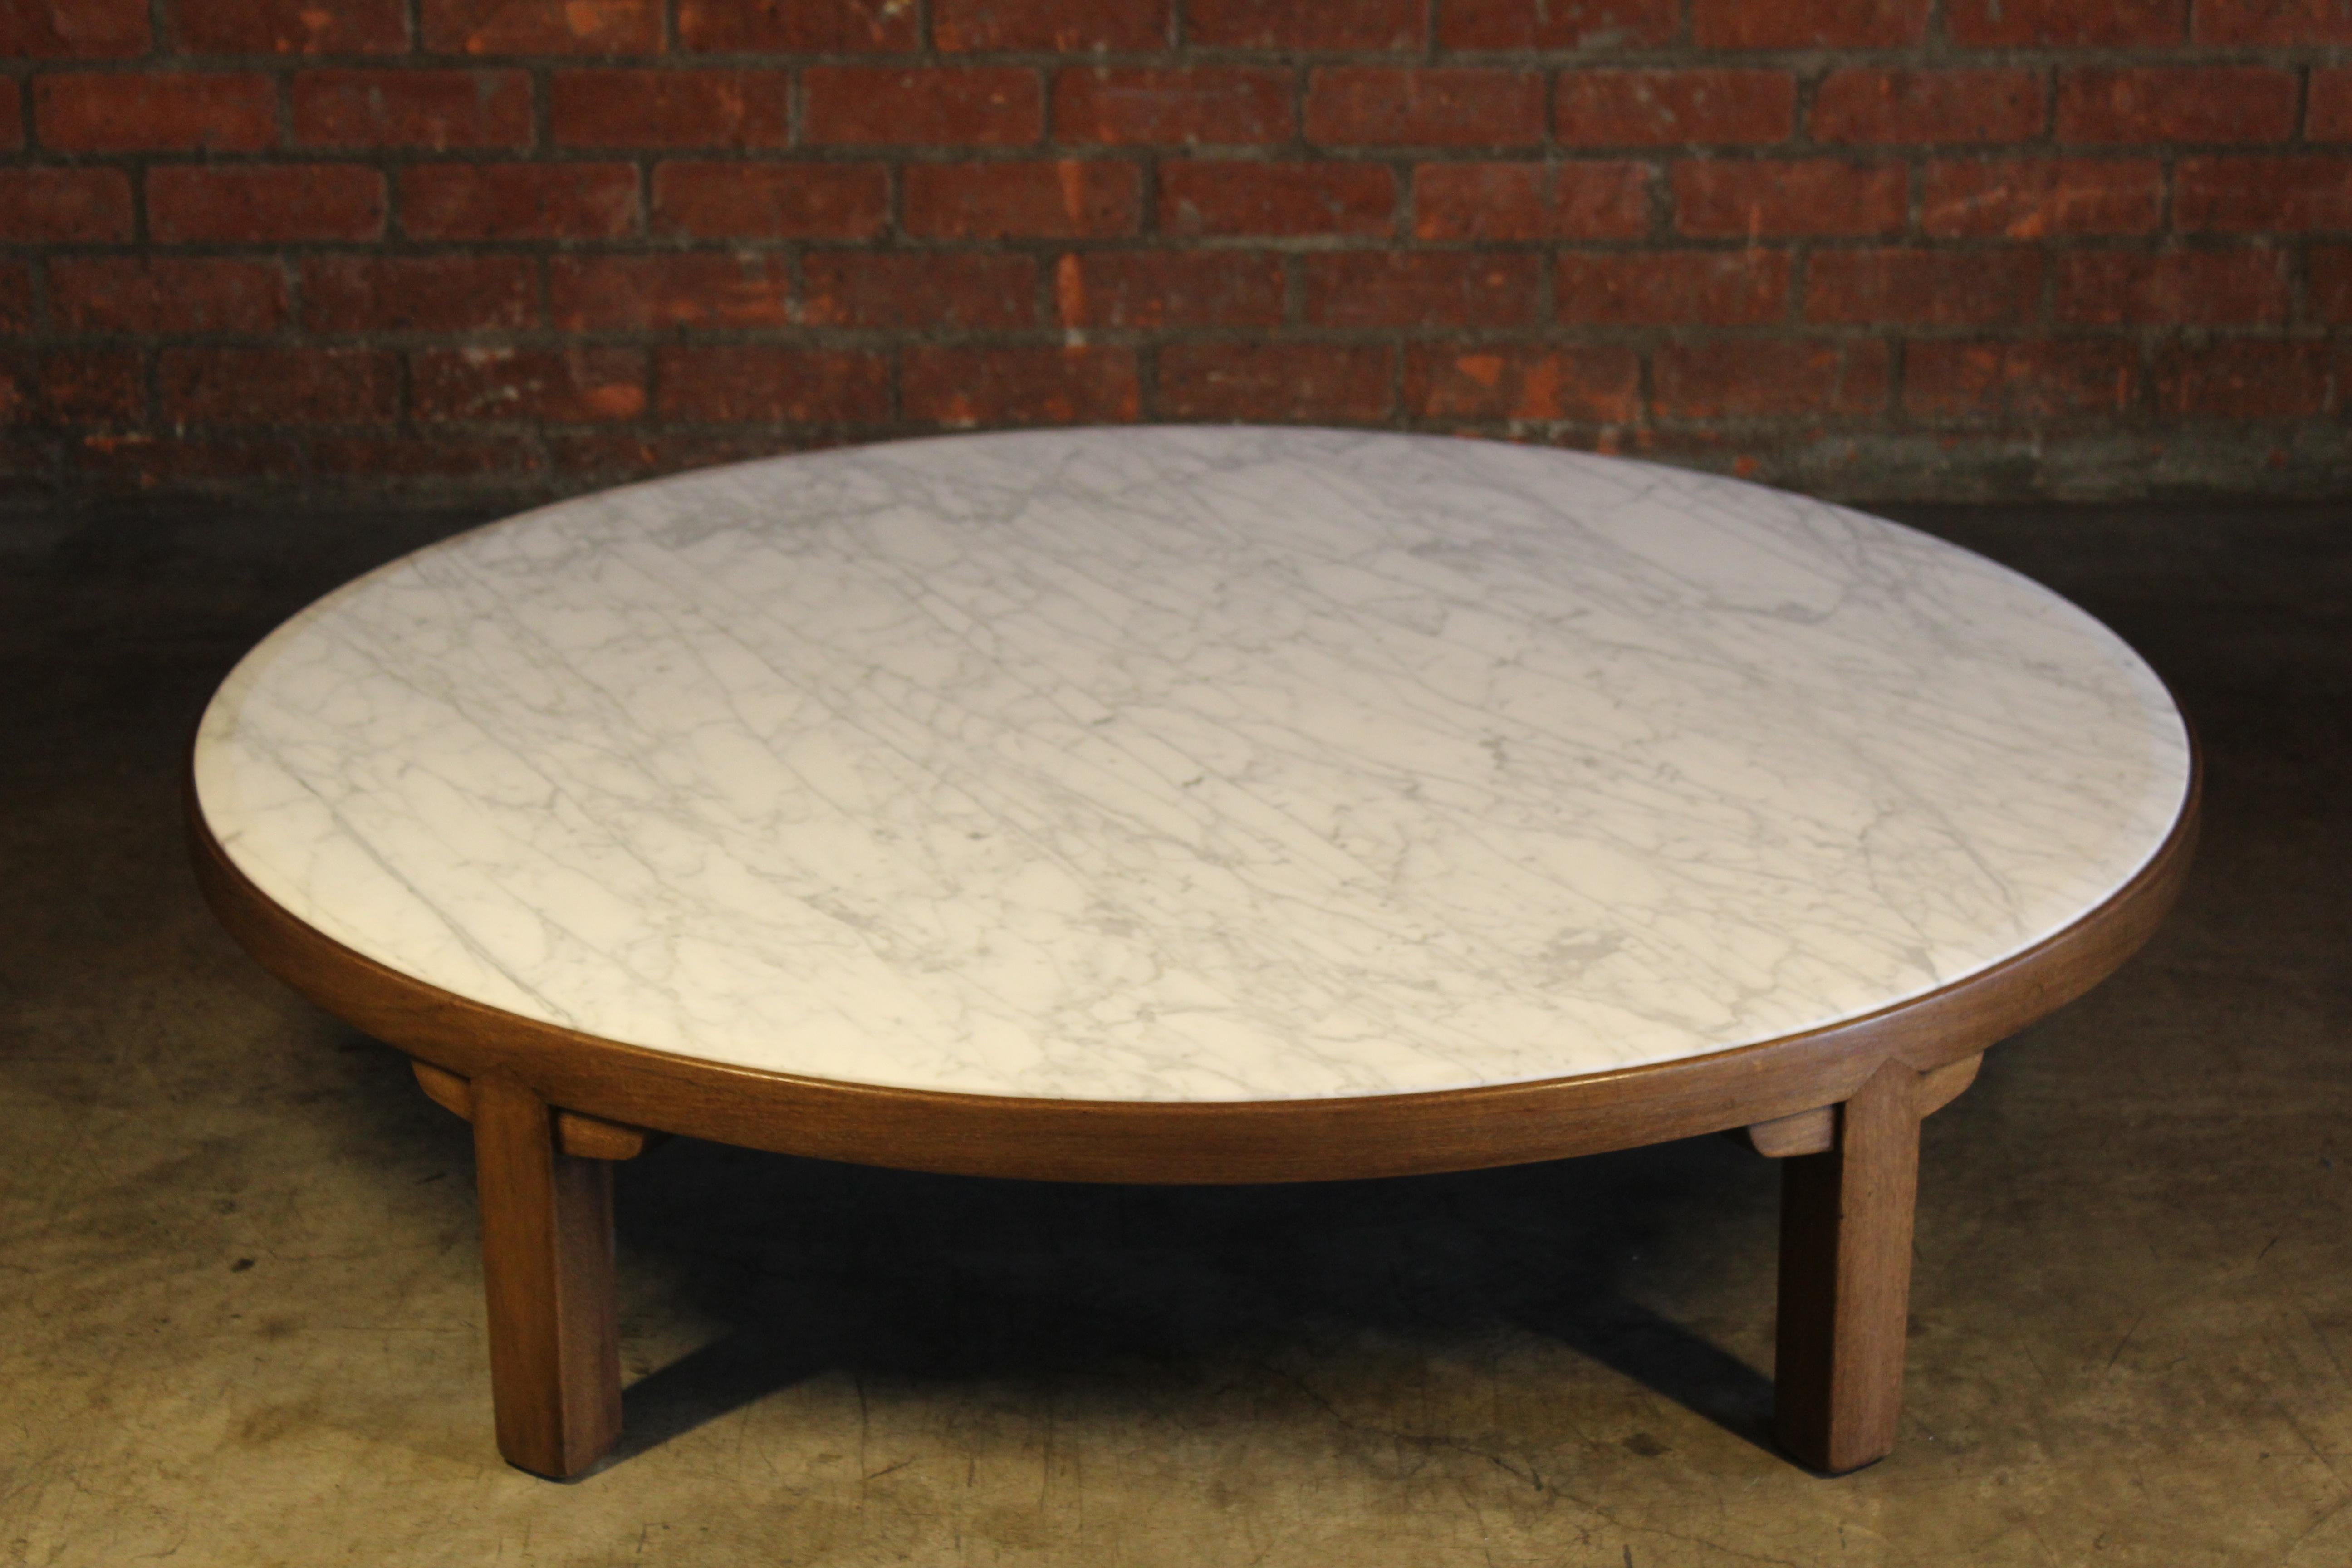 Mid-20th Century Marble Coffee Table by Edward Wormley for Dunbar, U.S.A, 1950s